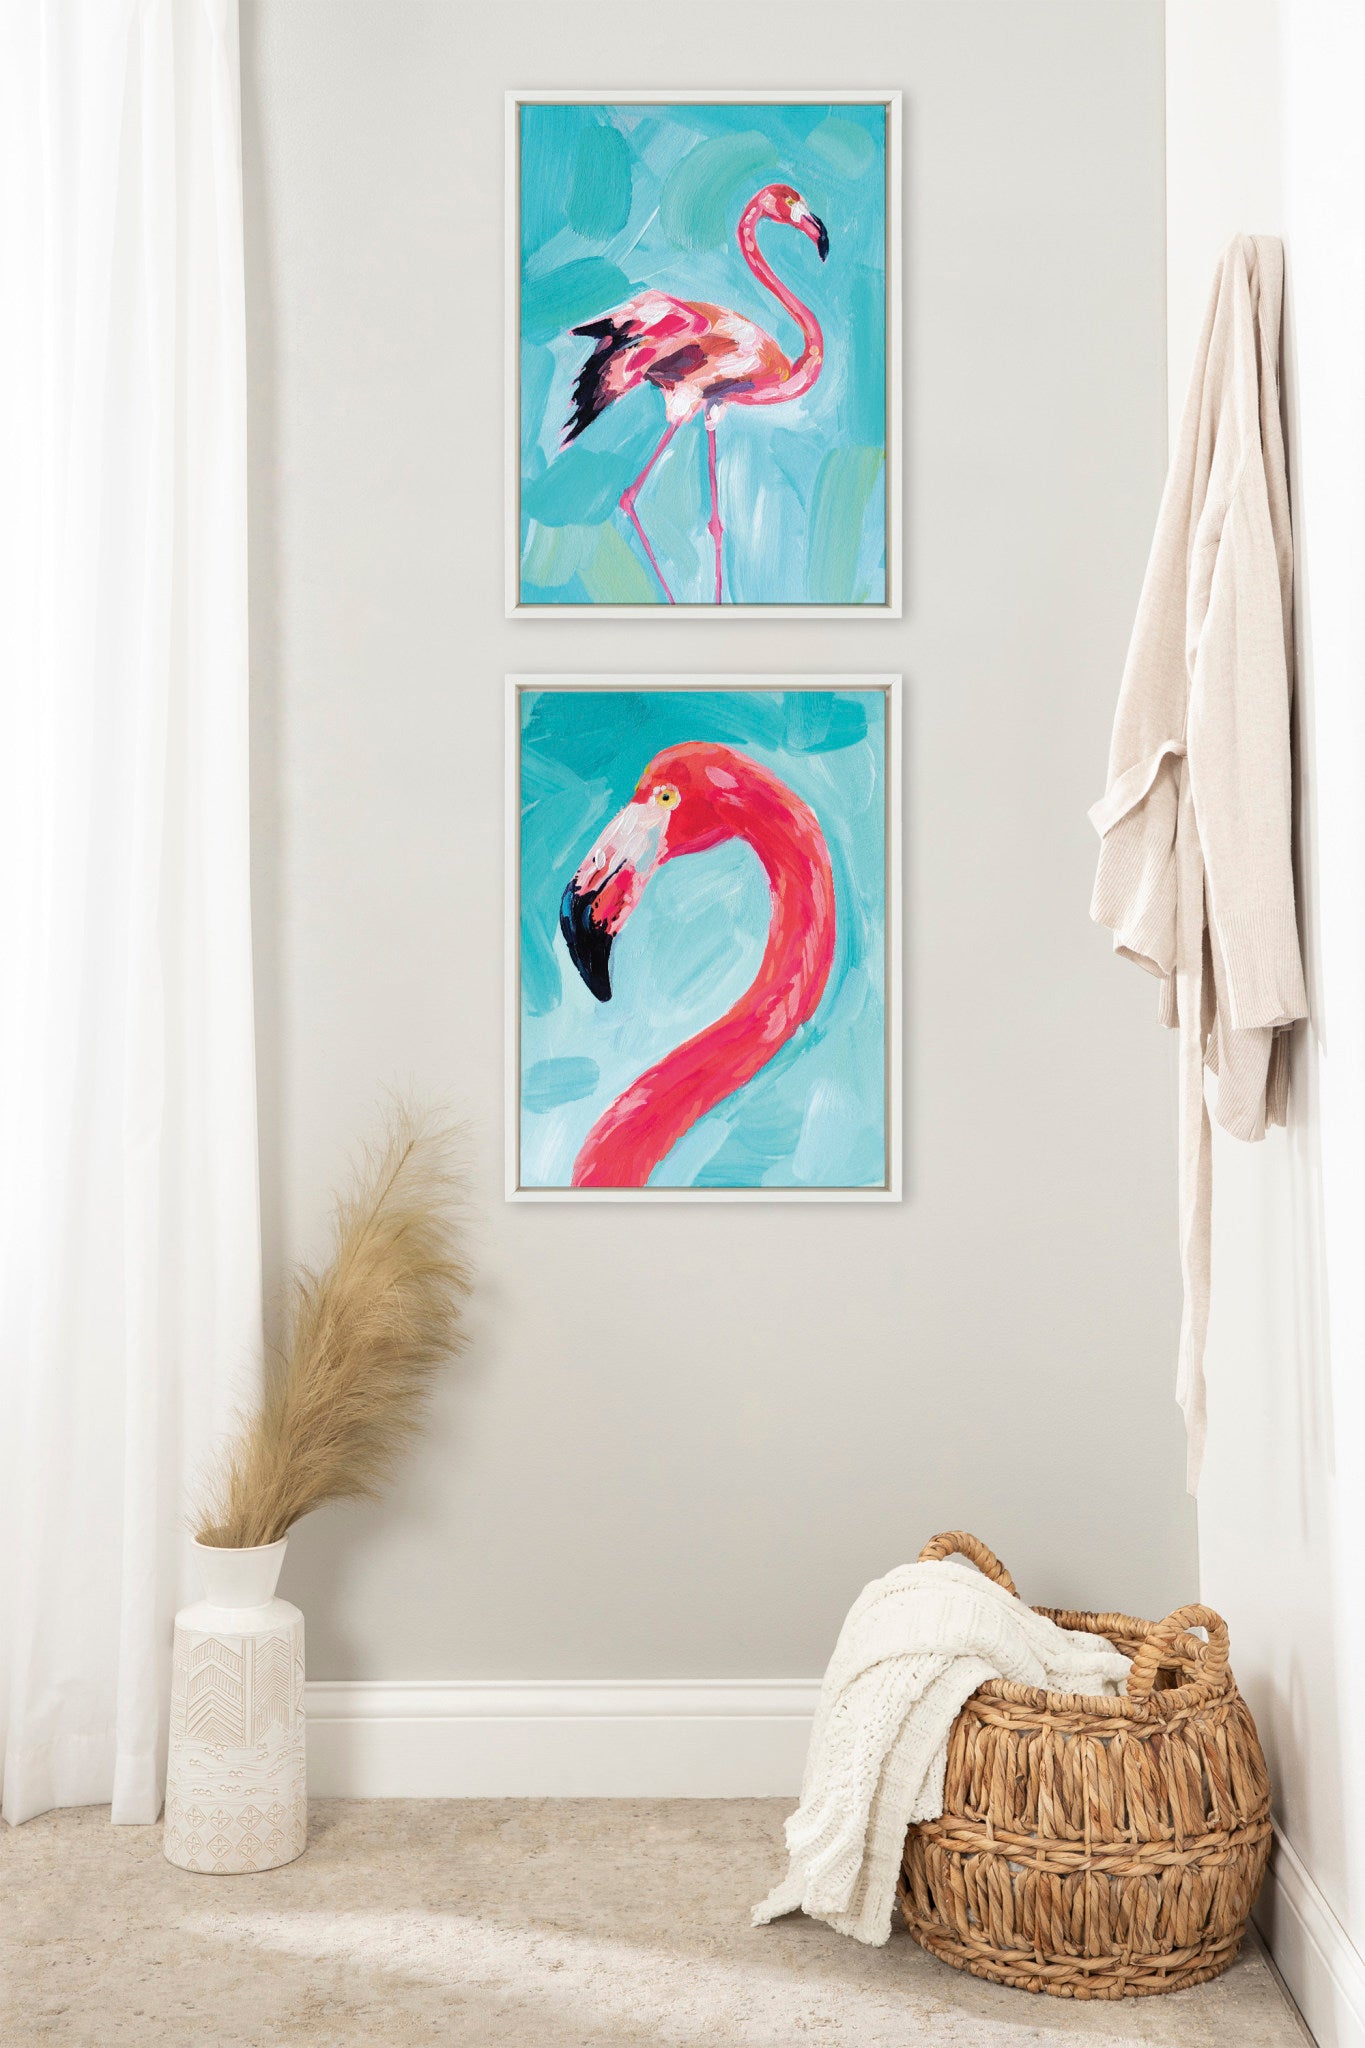 Sylvie Flamingo Study and Feathery Friend Framed Canvas Art Set by Rachel Christopoulos